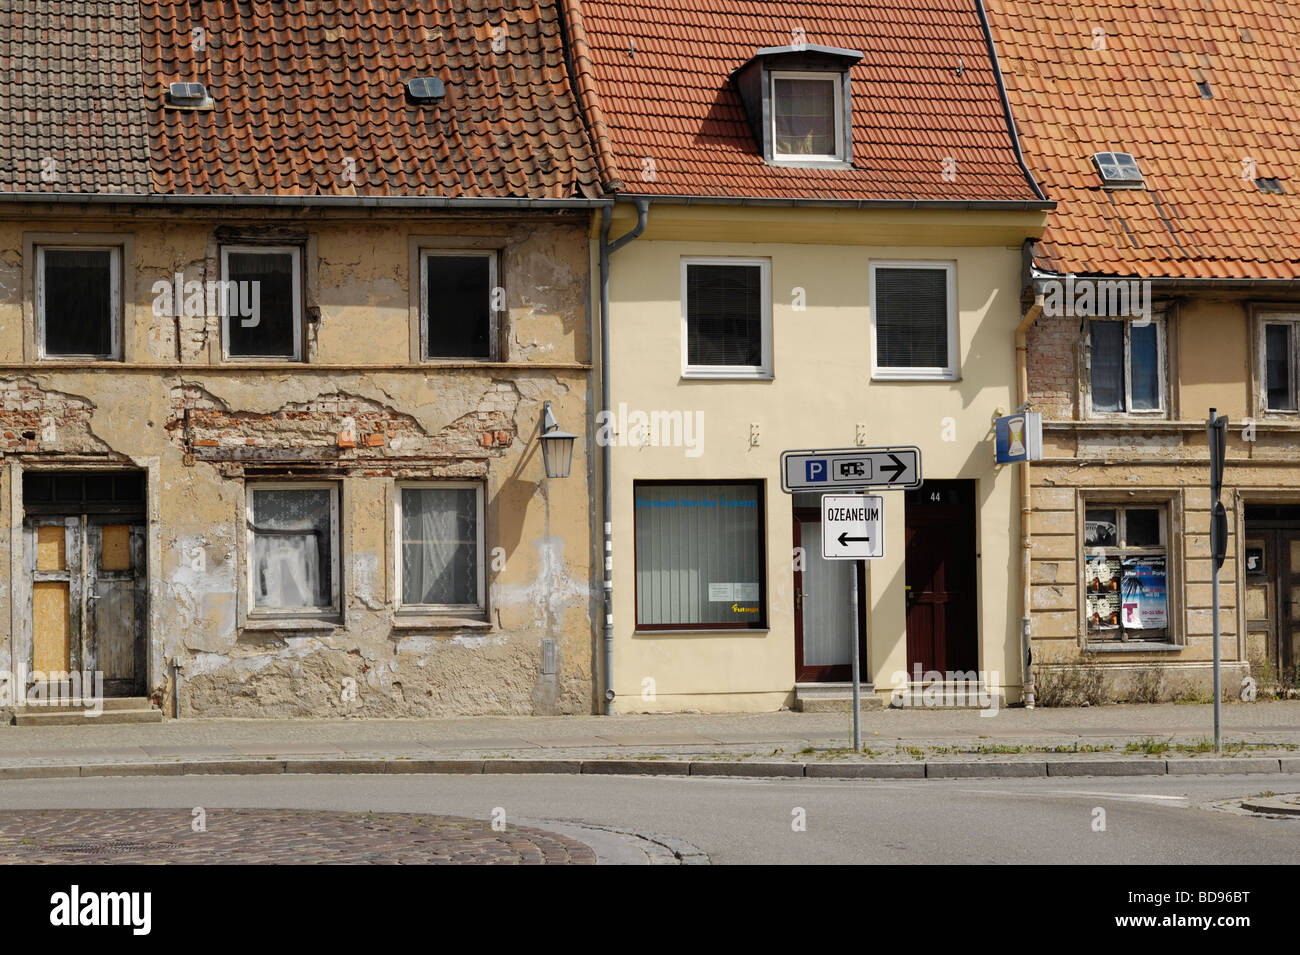 Houses in state of deterioration next to a reconstructed one in old town Stralsund - Germany Stock Photo